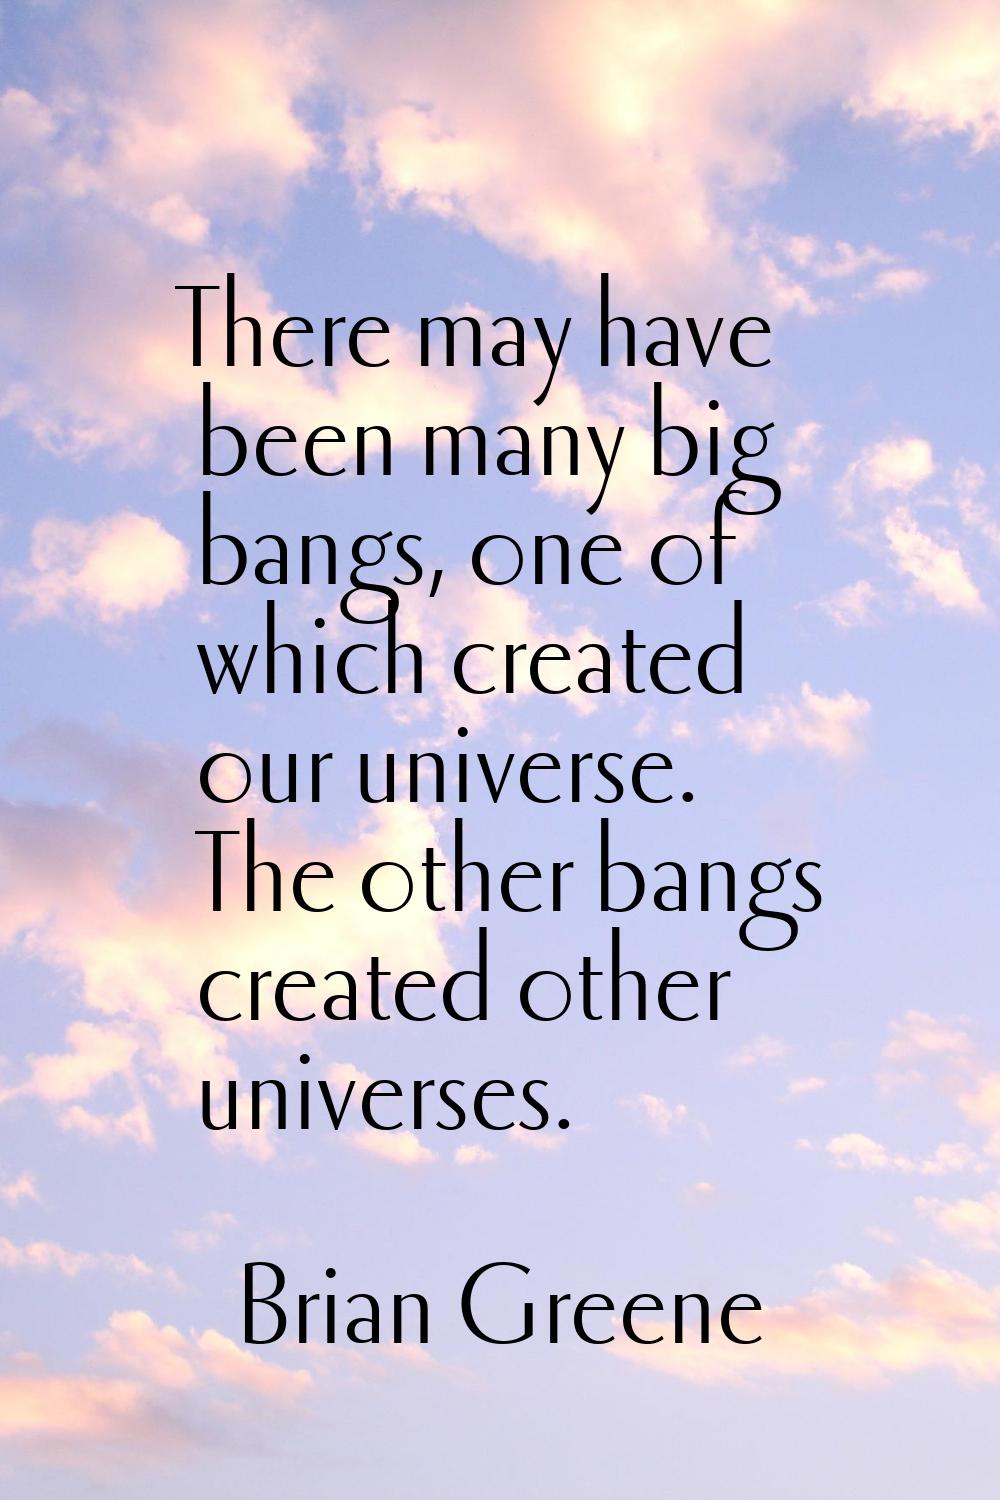 There may have been many big bangs, one of which created our universe. The other bangs created othe